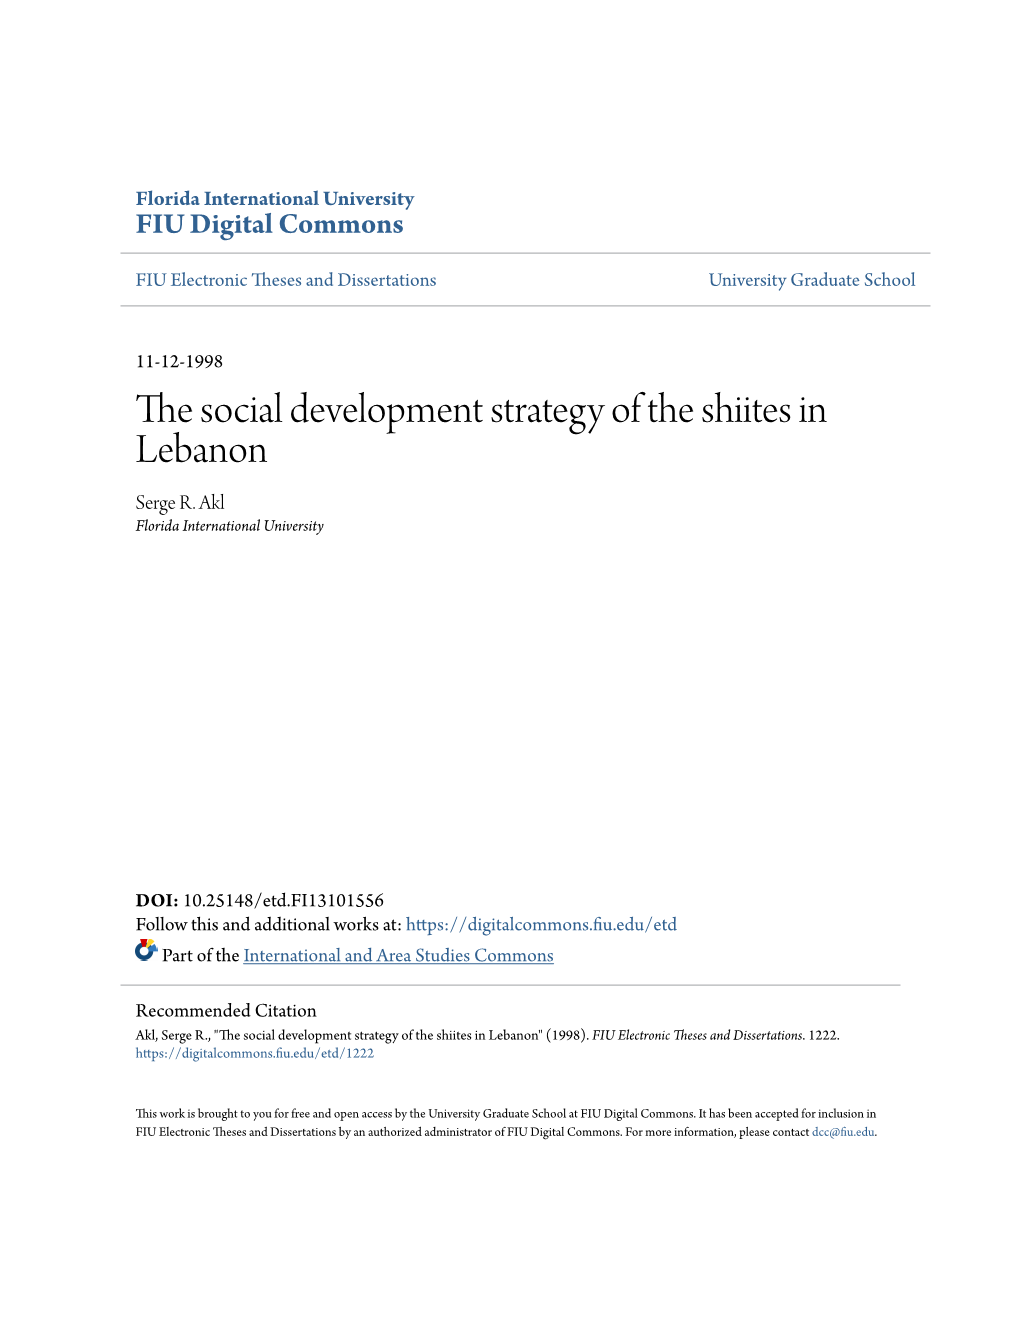 The Social Development Strategy of the Shiites in Lebanon Serge R